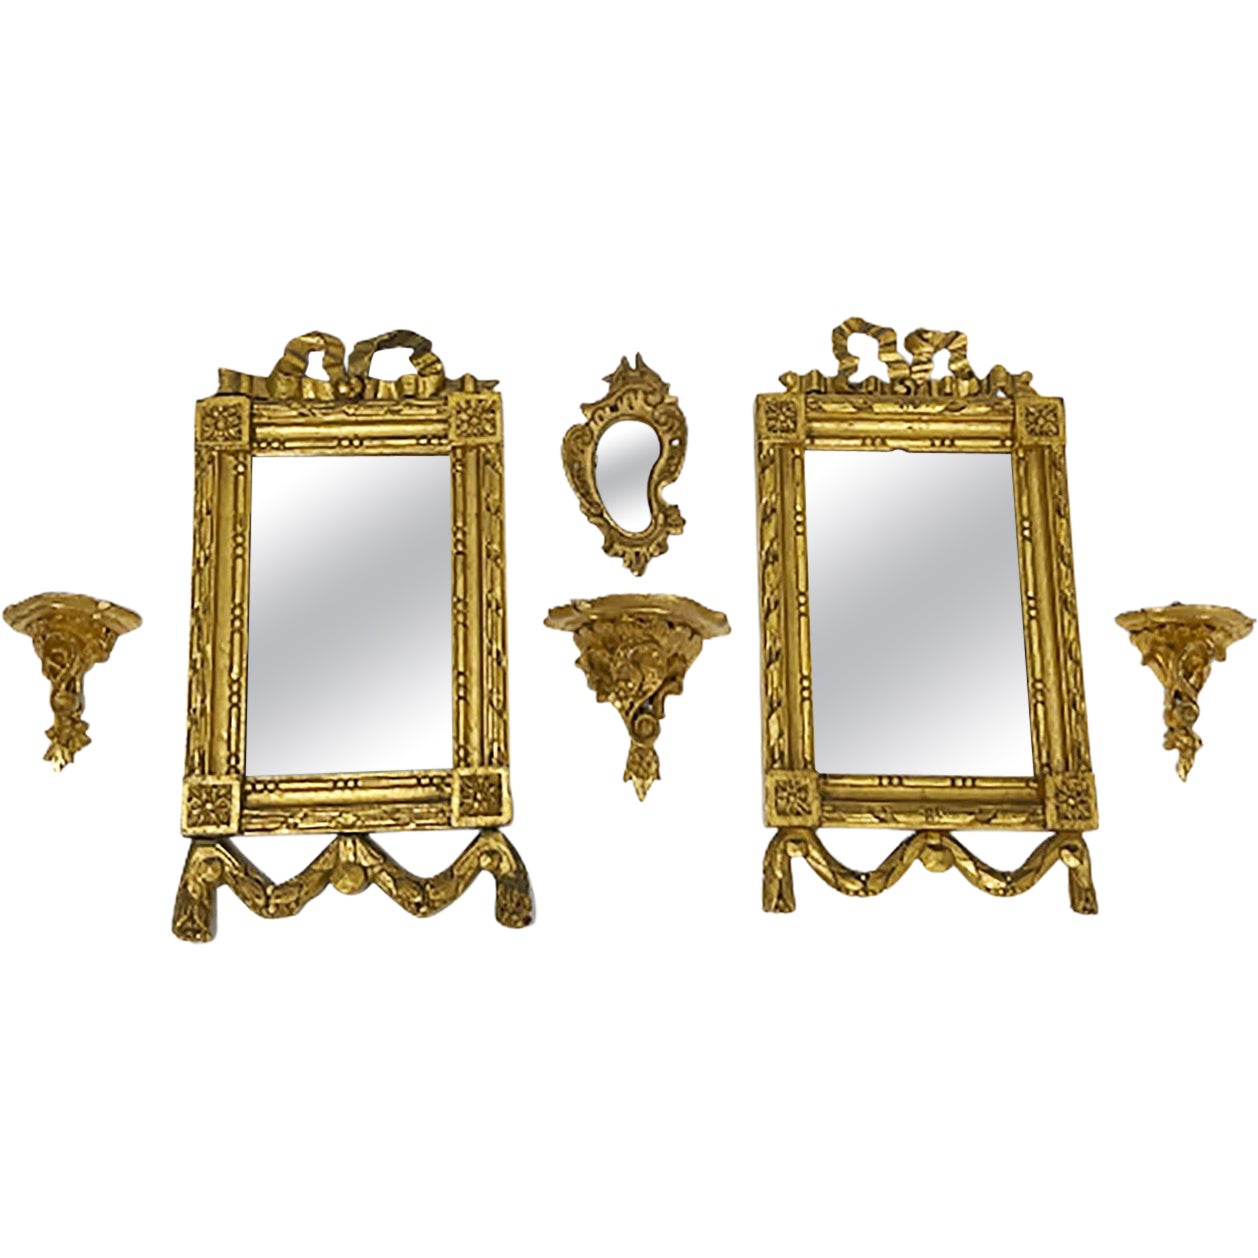 Miniature Gilt Wood Mirror and Console Set